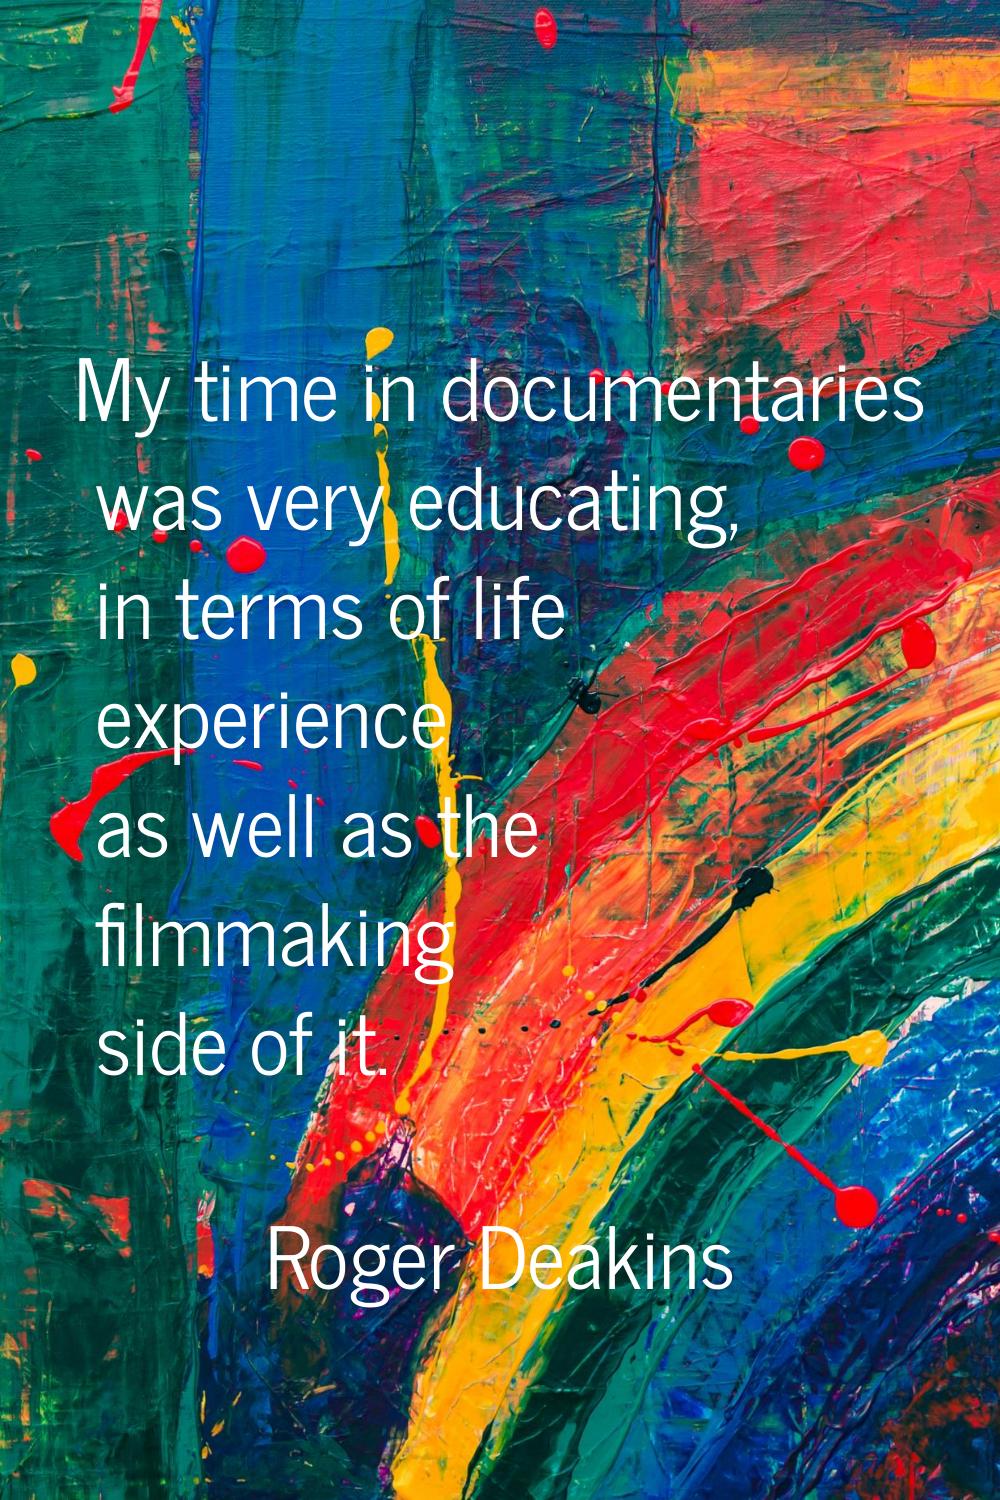 My time in documentaries was very educating, in terms of life experience as well as the filmmaking 